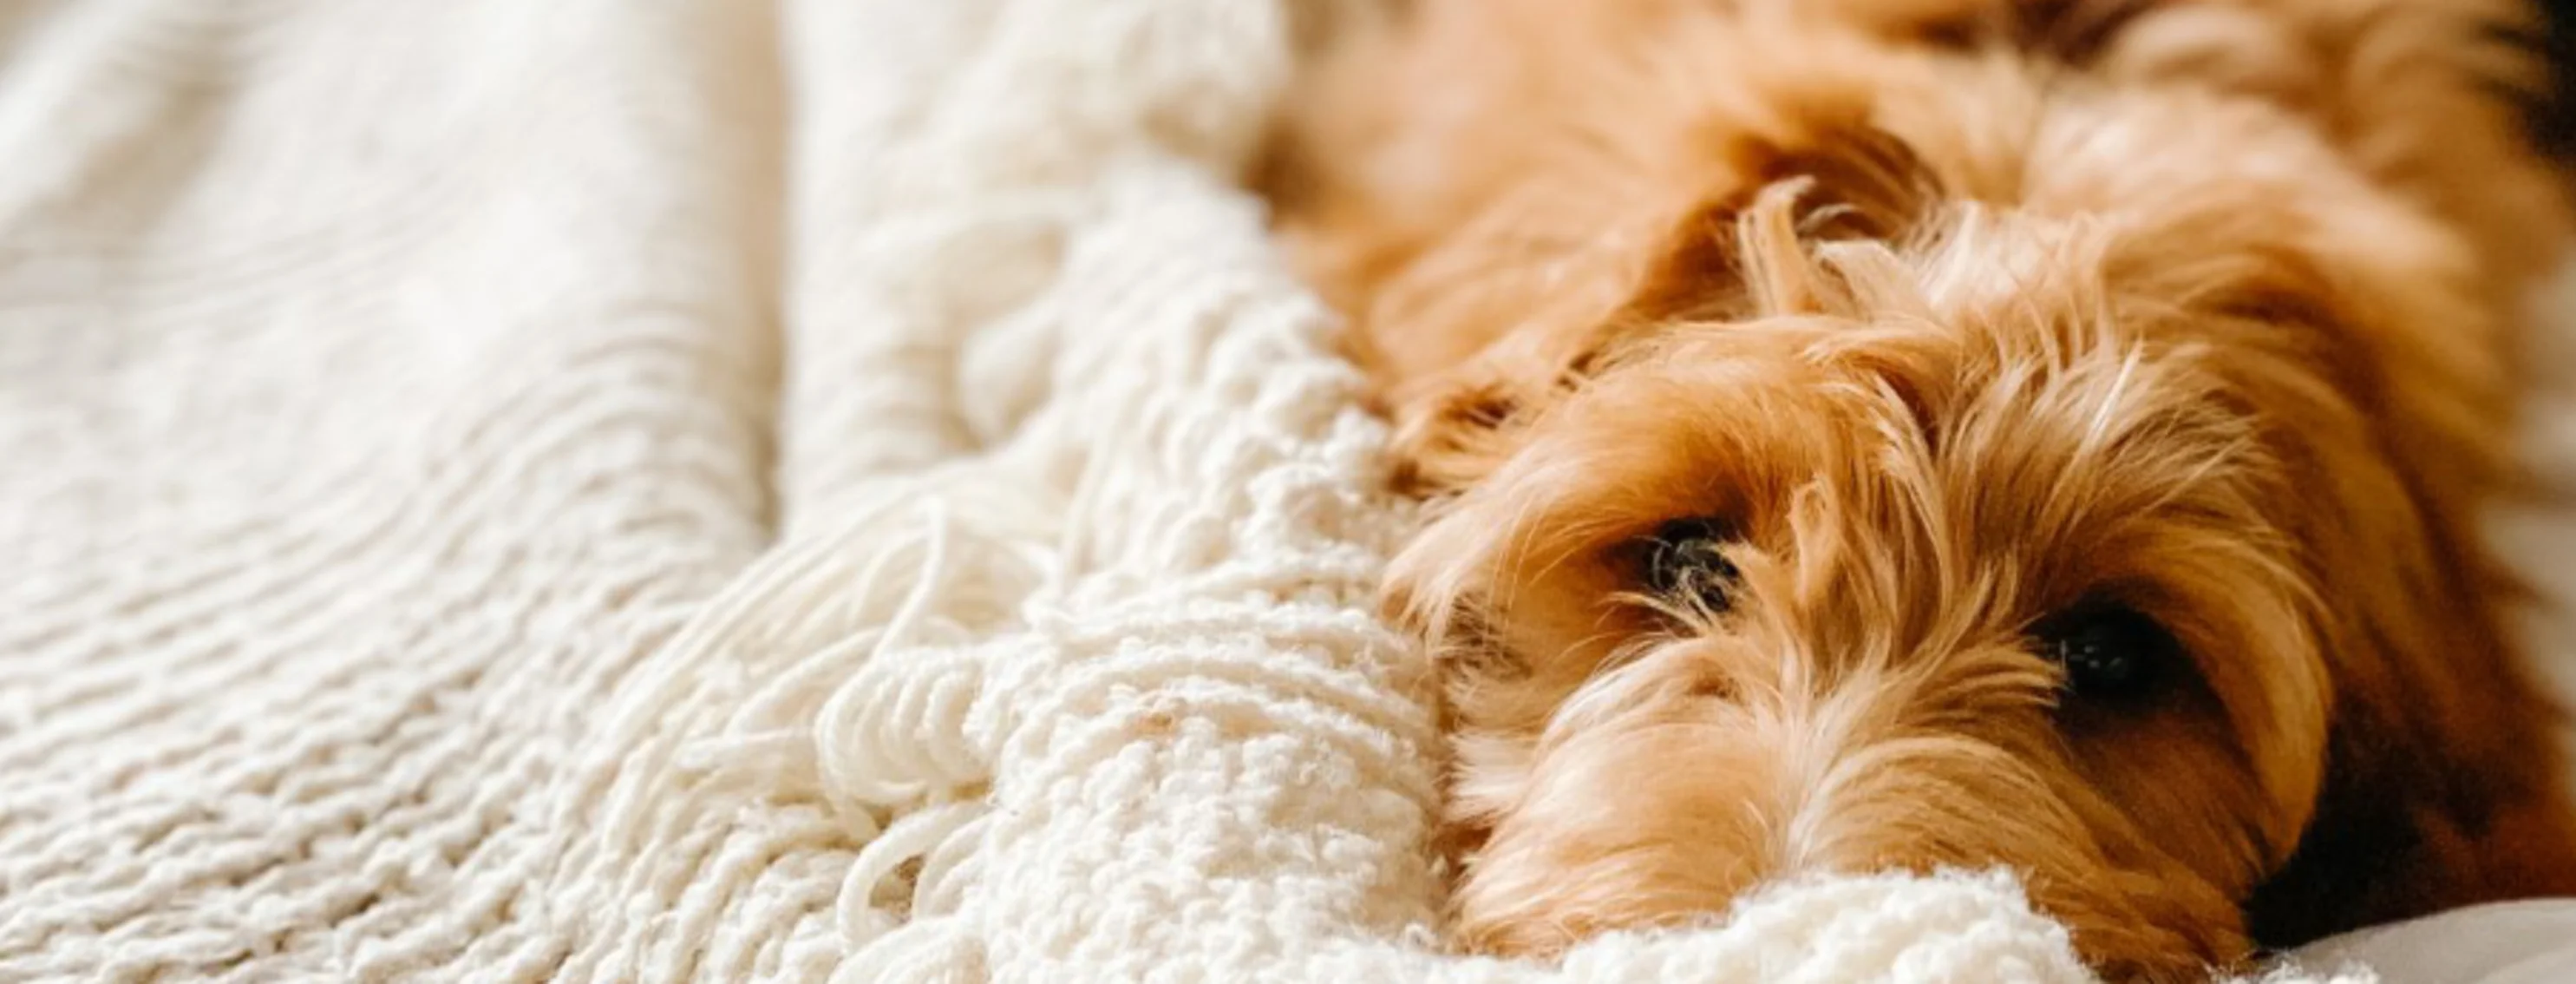 Orange fluffy dog laying in white blankets on a bed